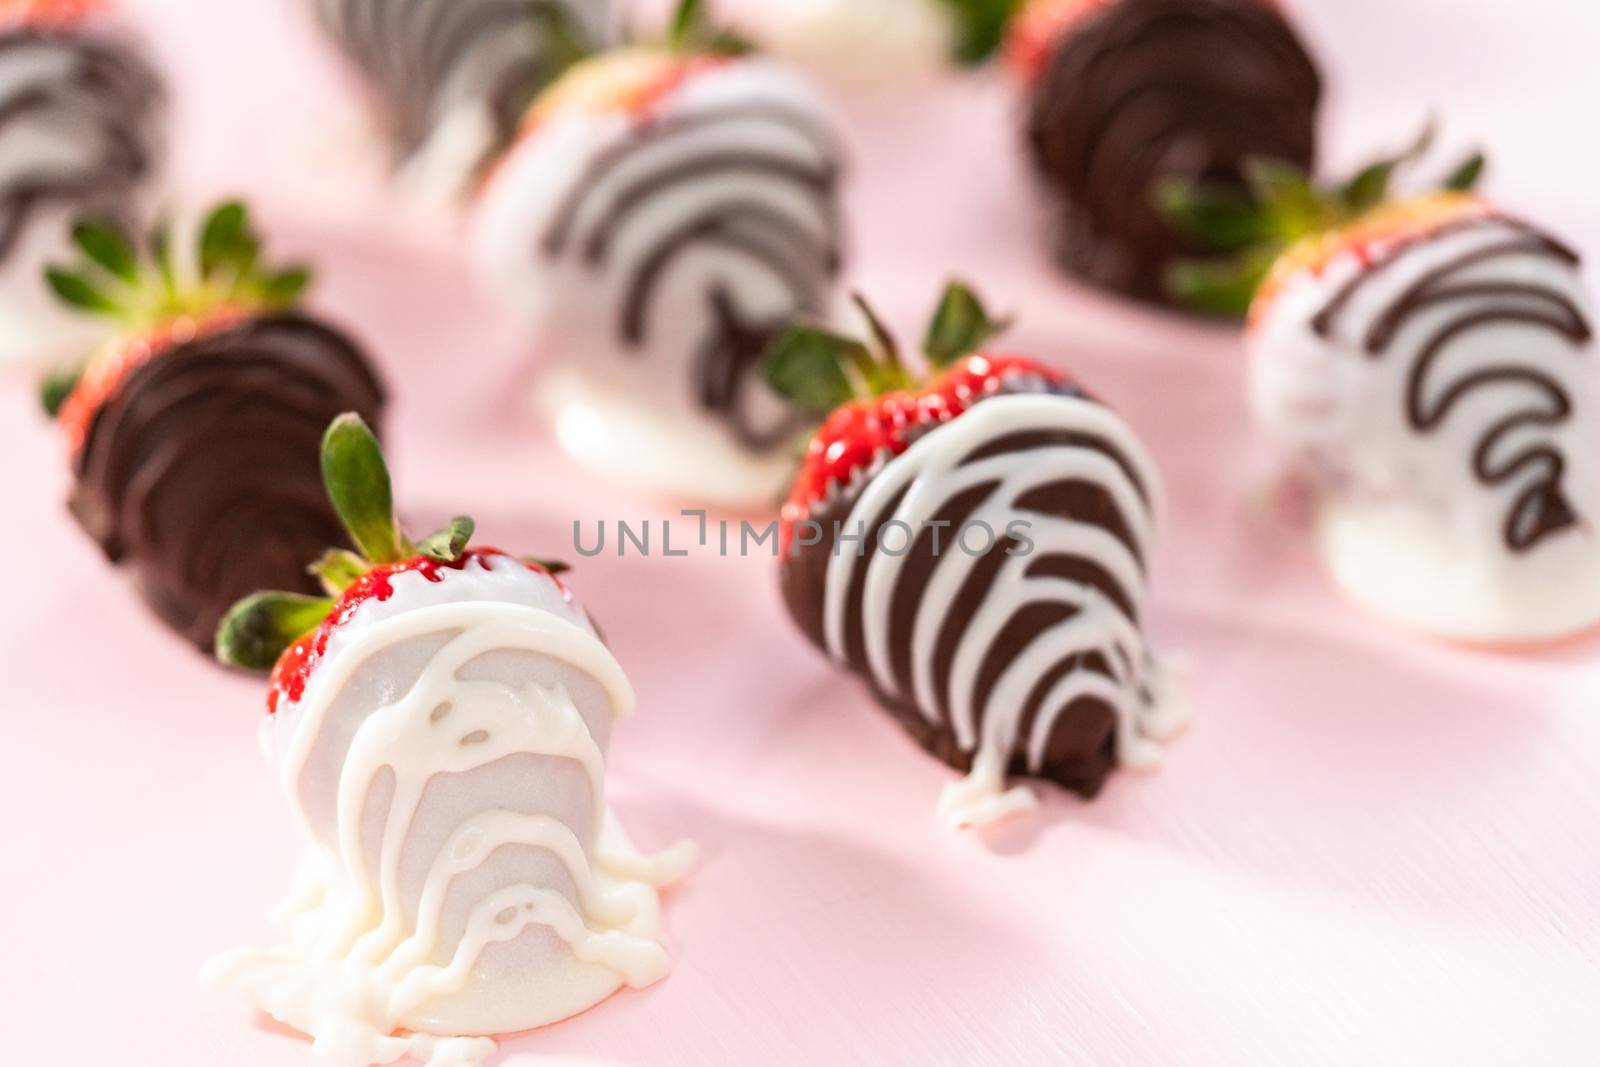 White and dark chocolate dipped strawberries on a pink background.